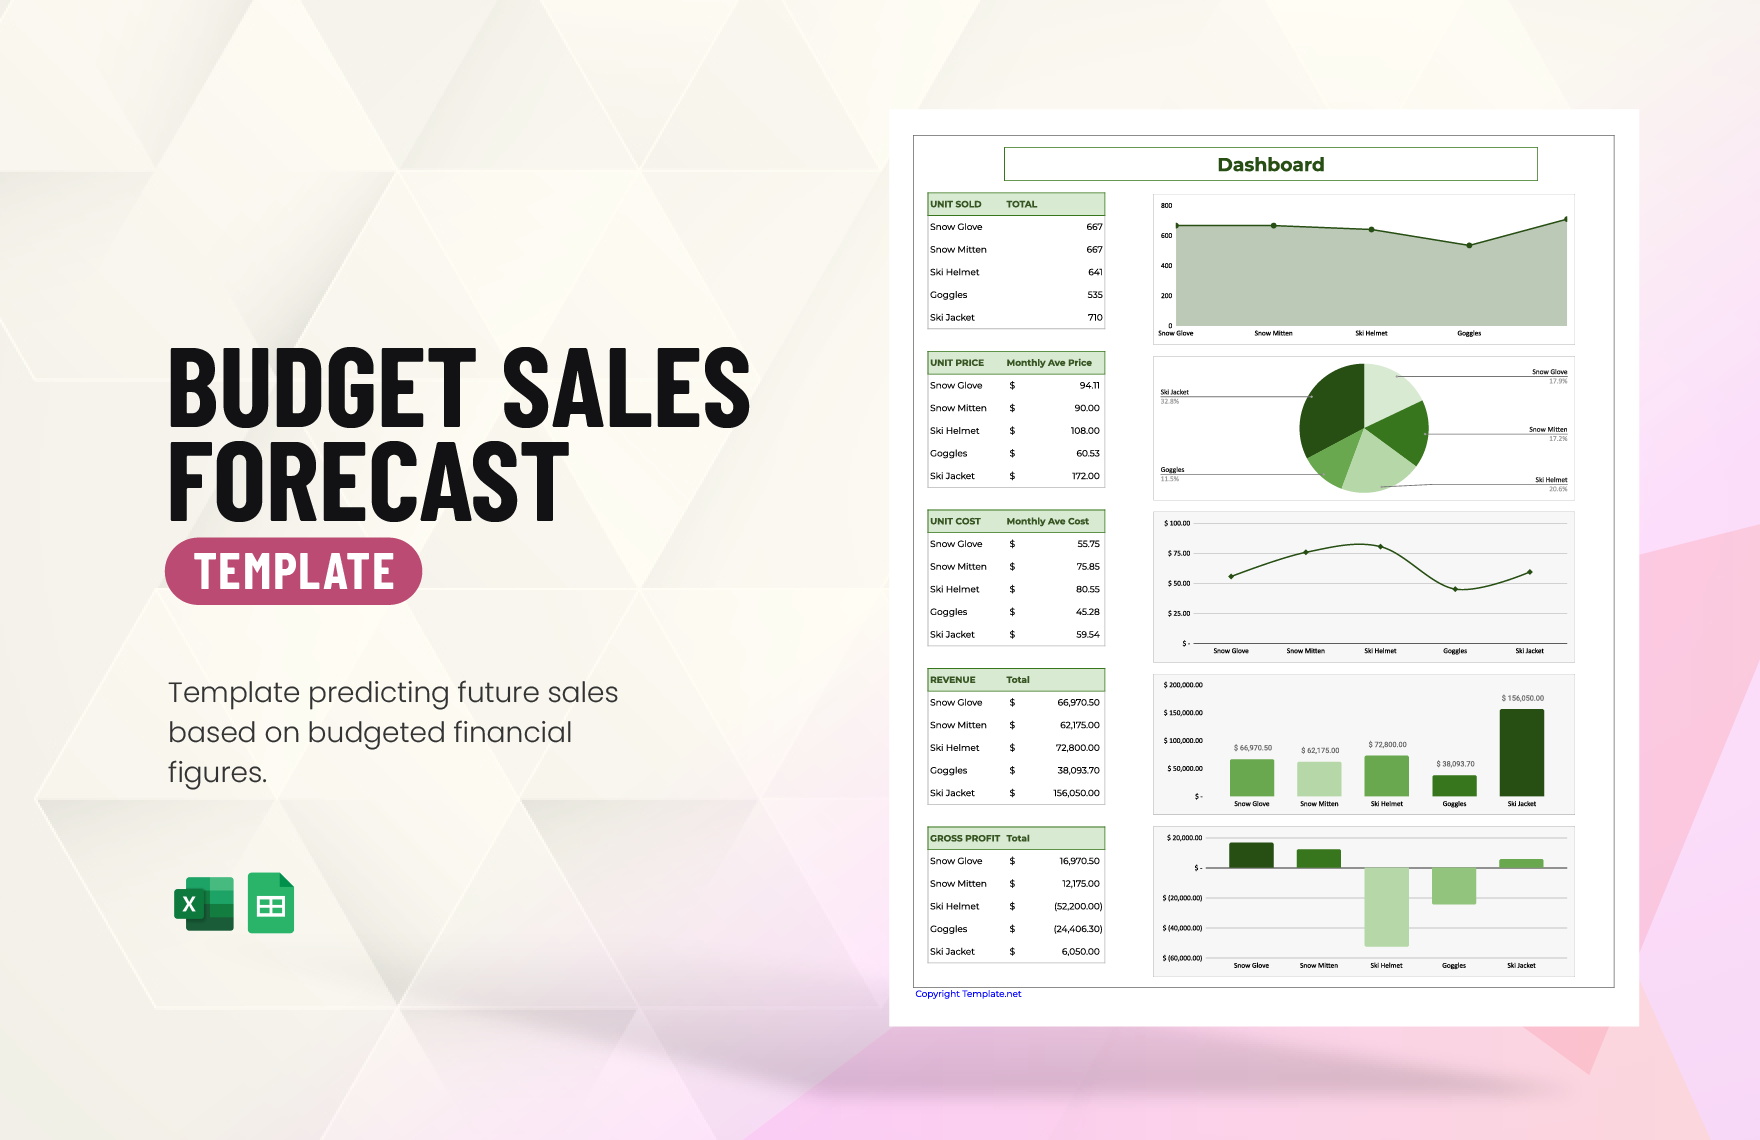 Budget Sales Forecast Template